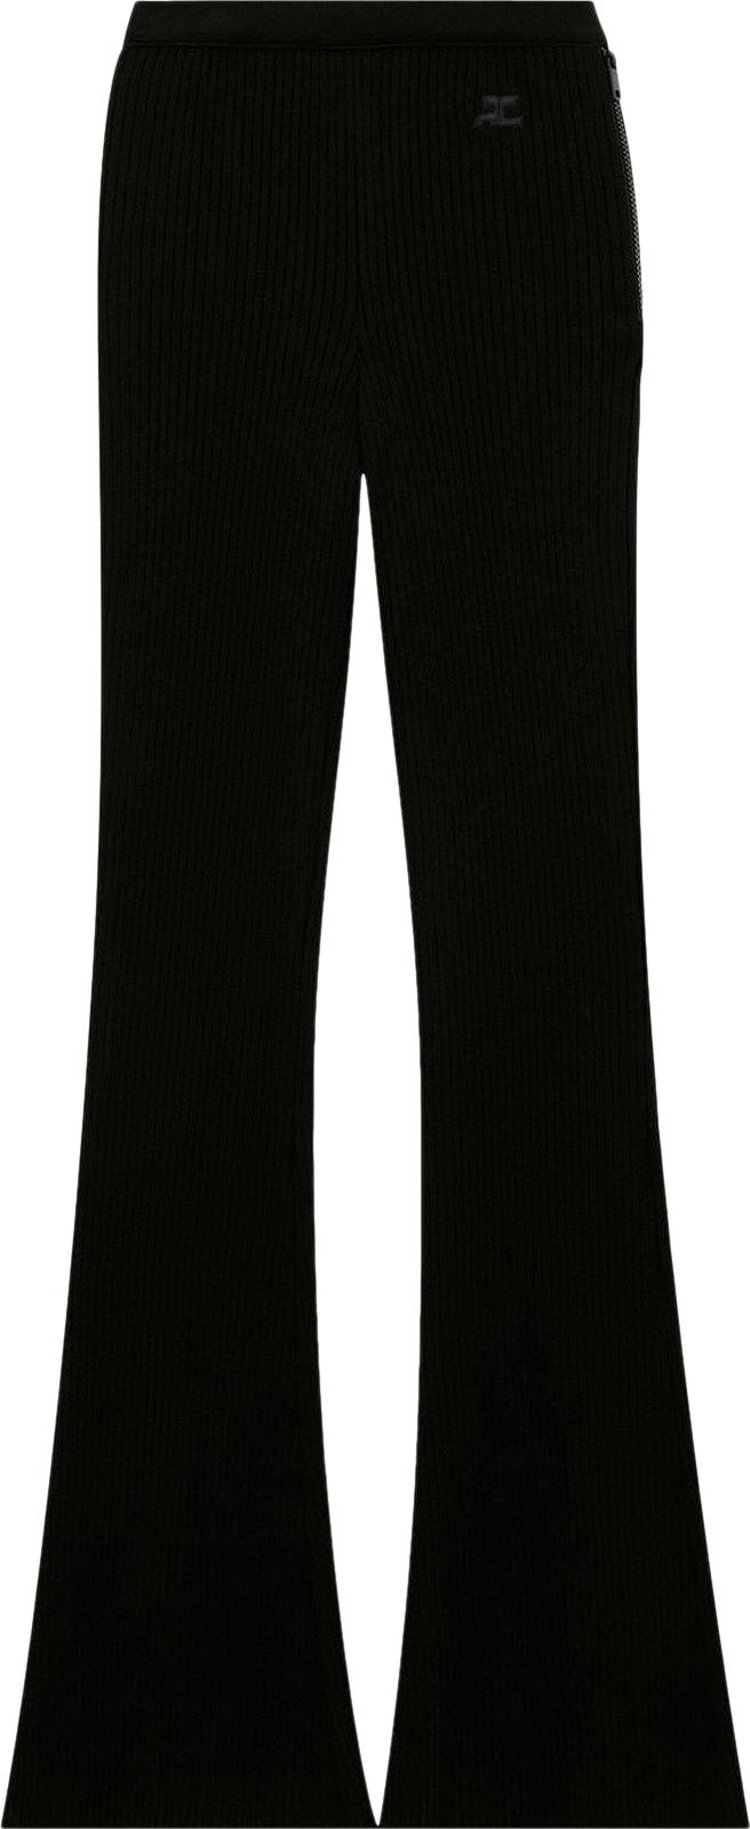 Ribbed-knit flared sweatpants in black - Live The Process